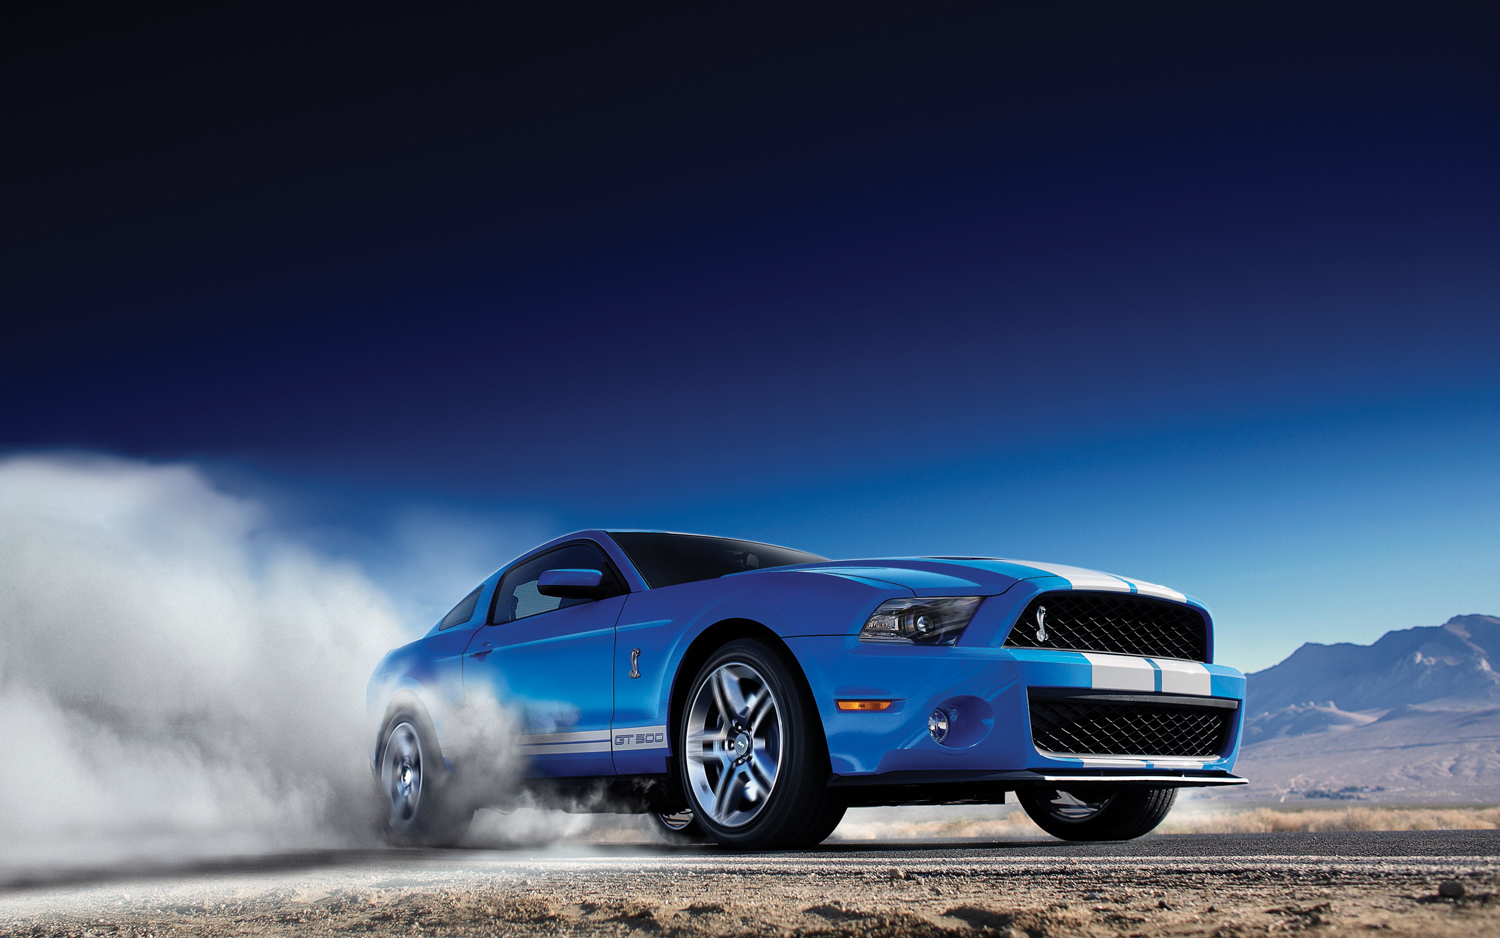 2012-Ford-Mustang-Shelby-GT500-front-three-quarter-burnout.jpg